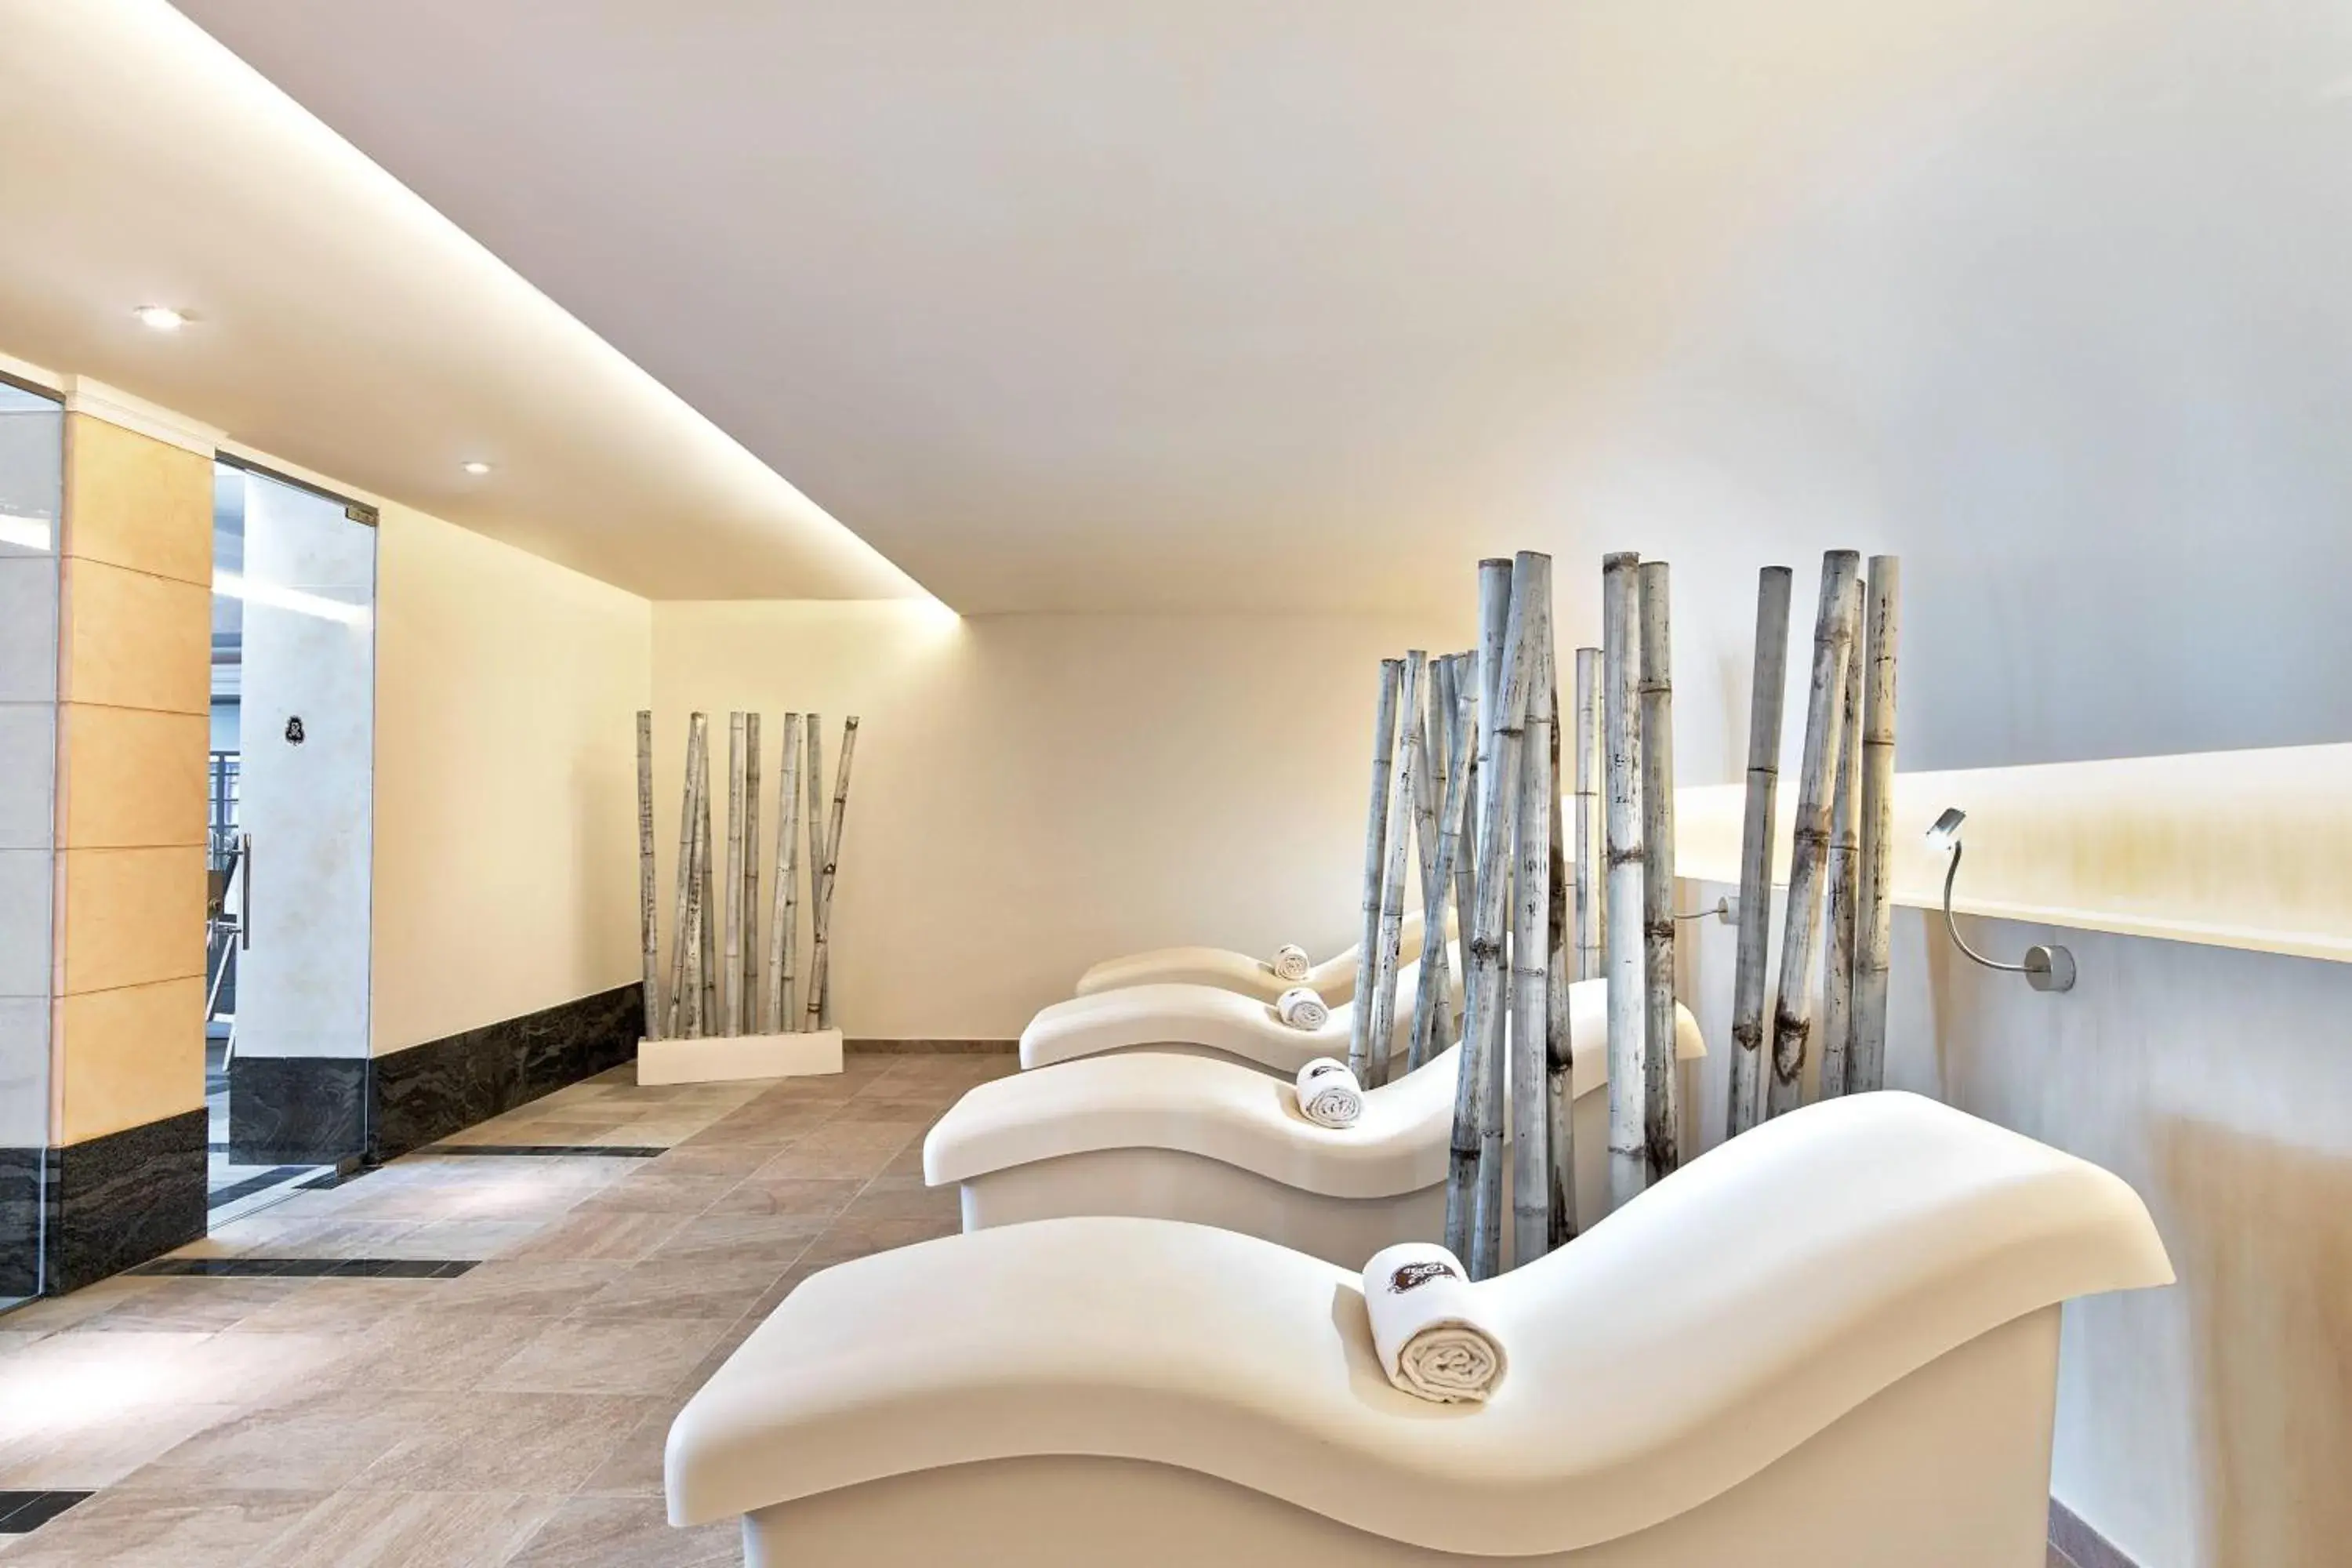 Spa and wellness centre/facilities in The St. Regis Mardavall Mallorca Resort